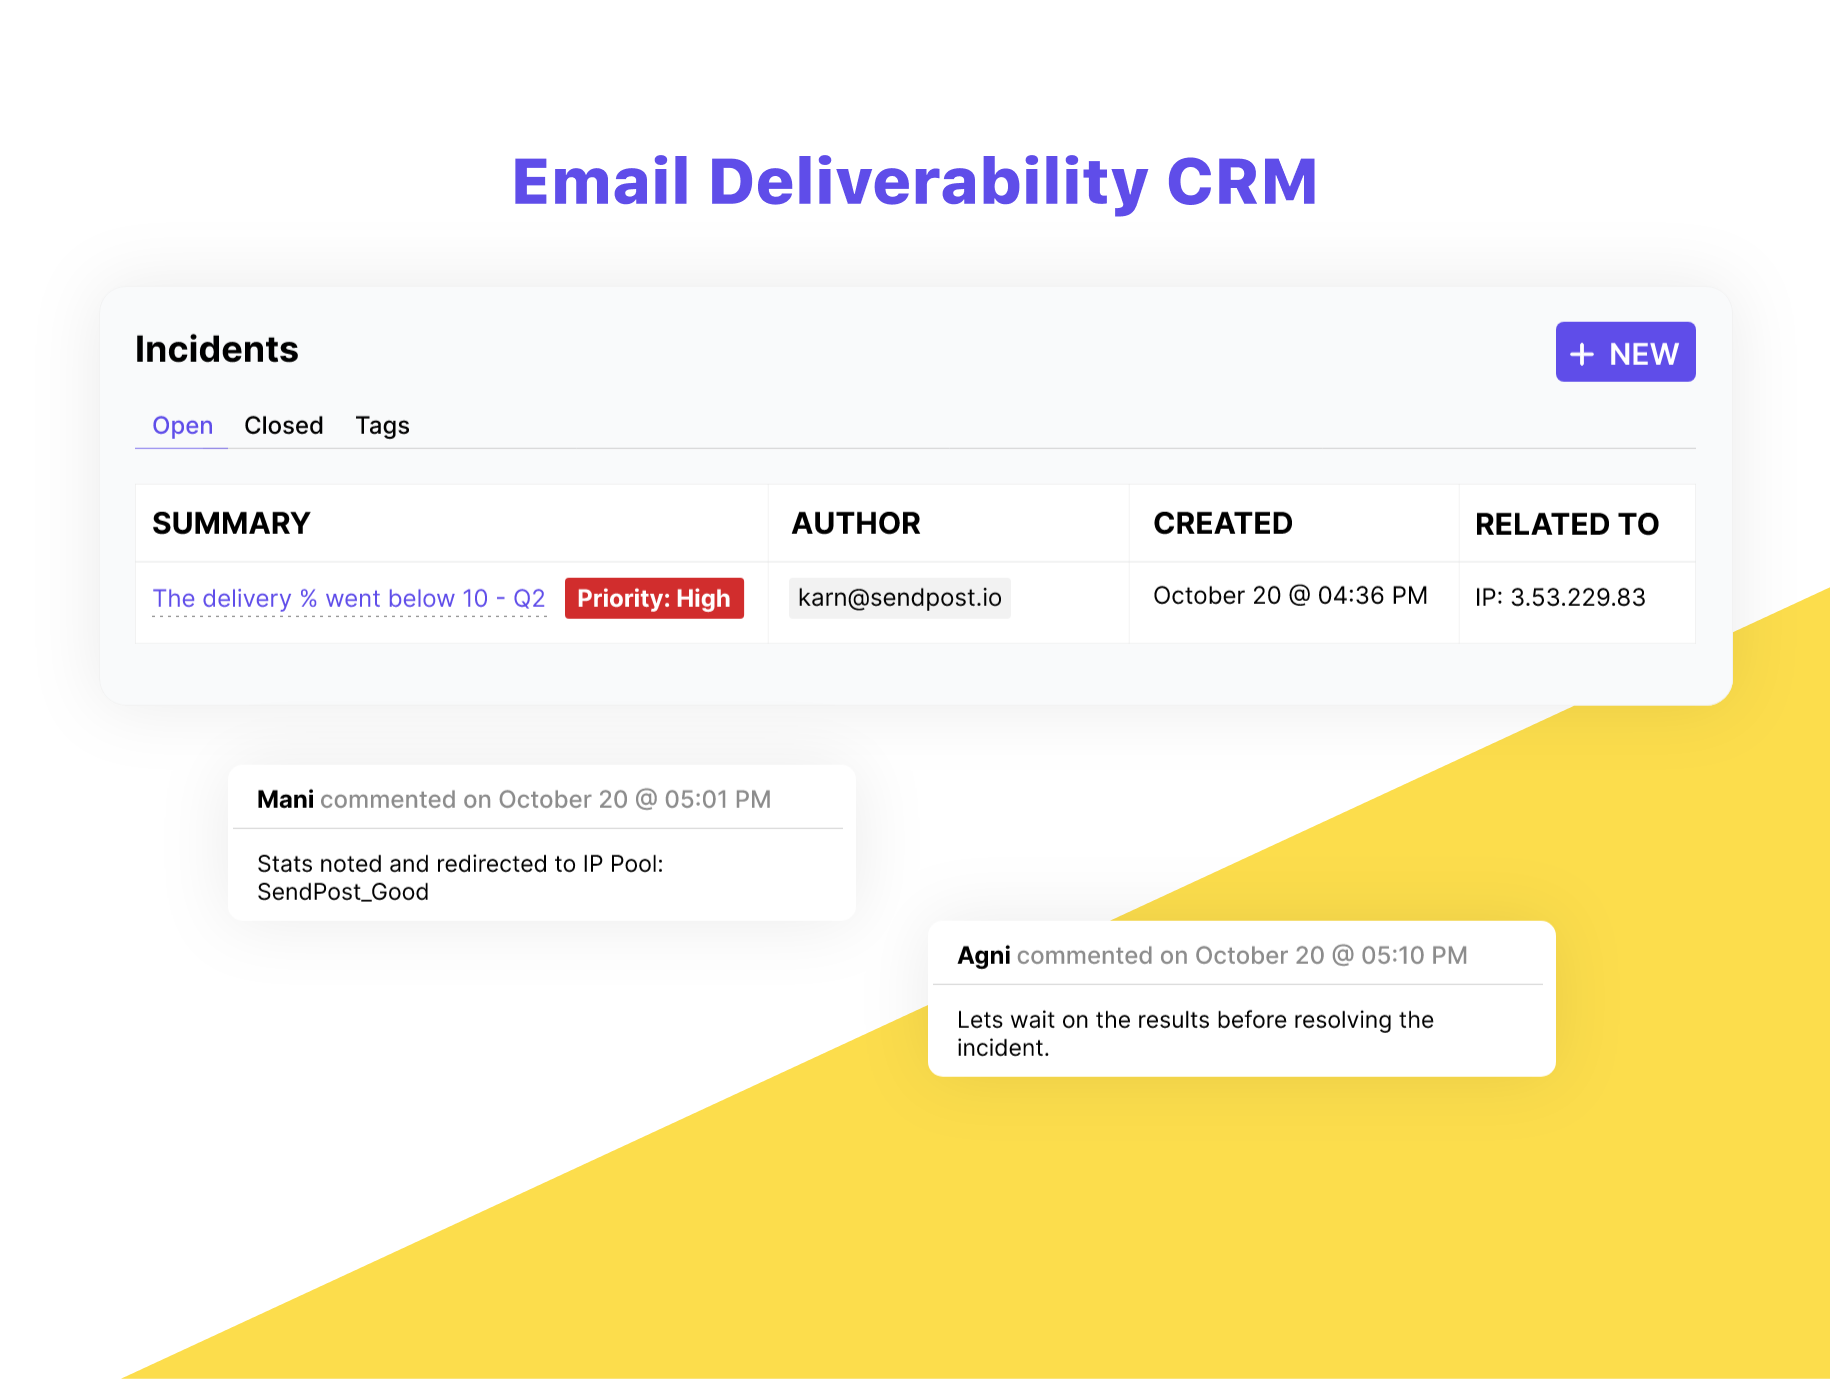 SendPost email deliverability CRM